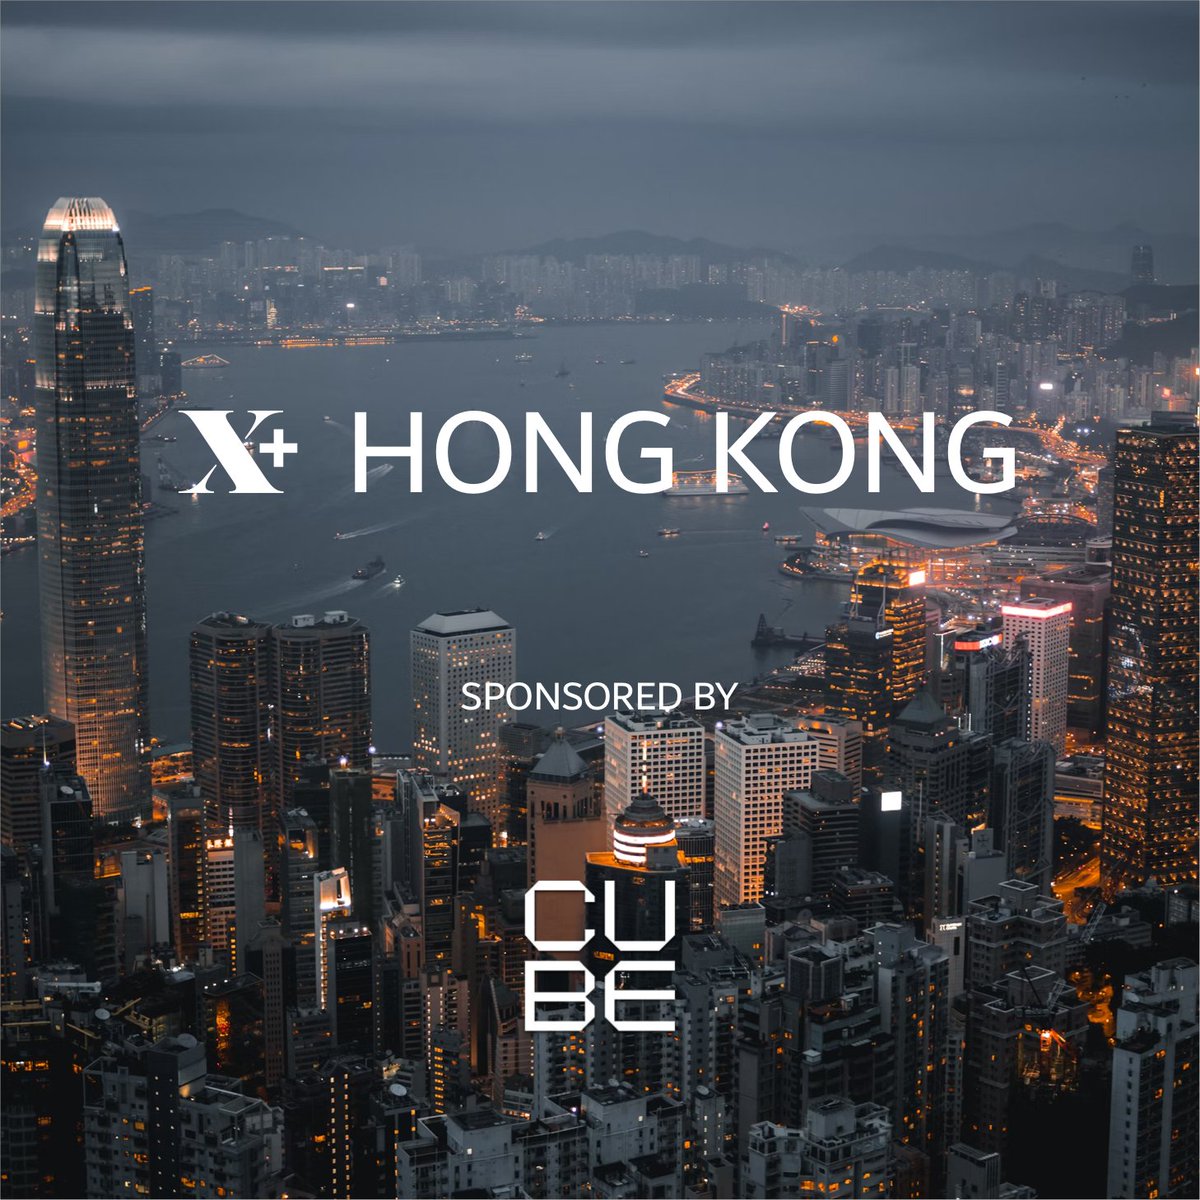 We're proud to collaborate with @cubexch who are building some of the most innovative and easiest ways to trade runes to host our X+ Hong Kong event. Join us on May 9 to meet up leaders of the Bitcoin movement. Space is limited: lu.ma/iuxuyl0m